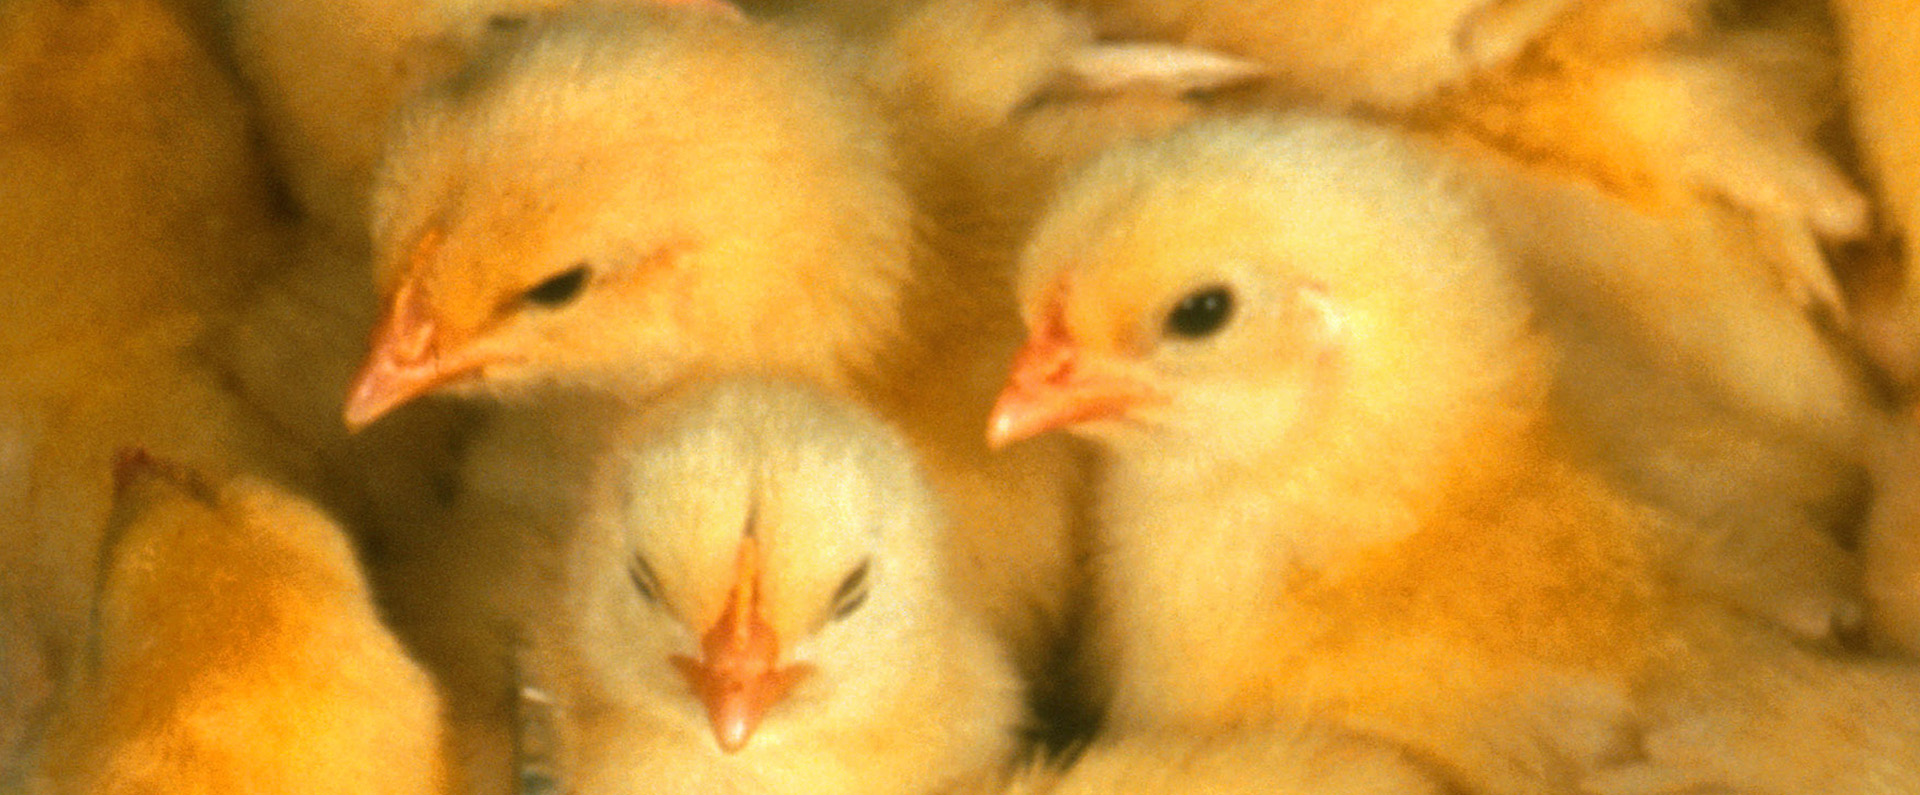 A group of yellow chicks